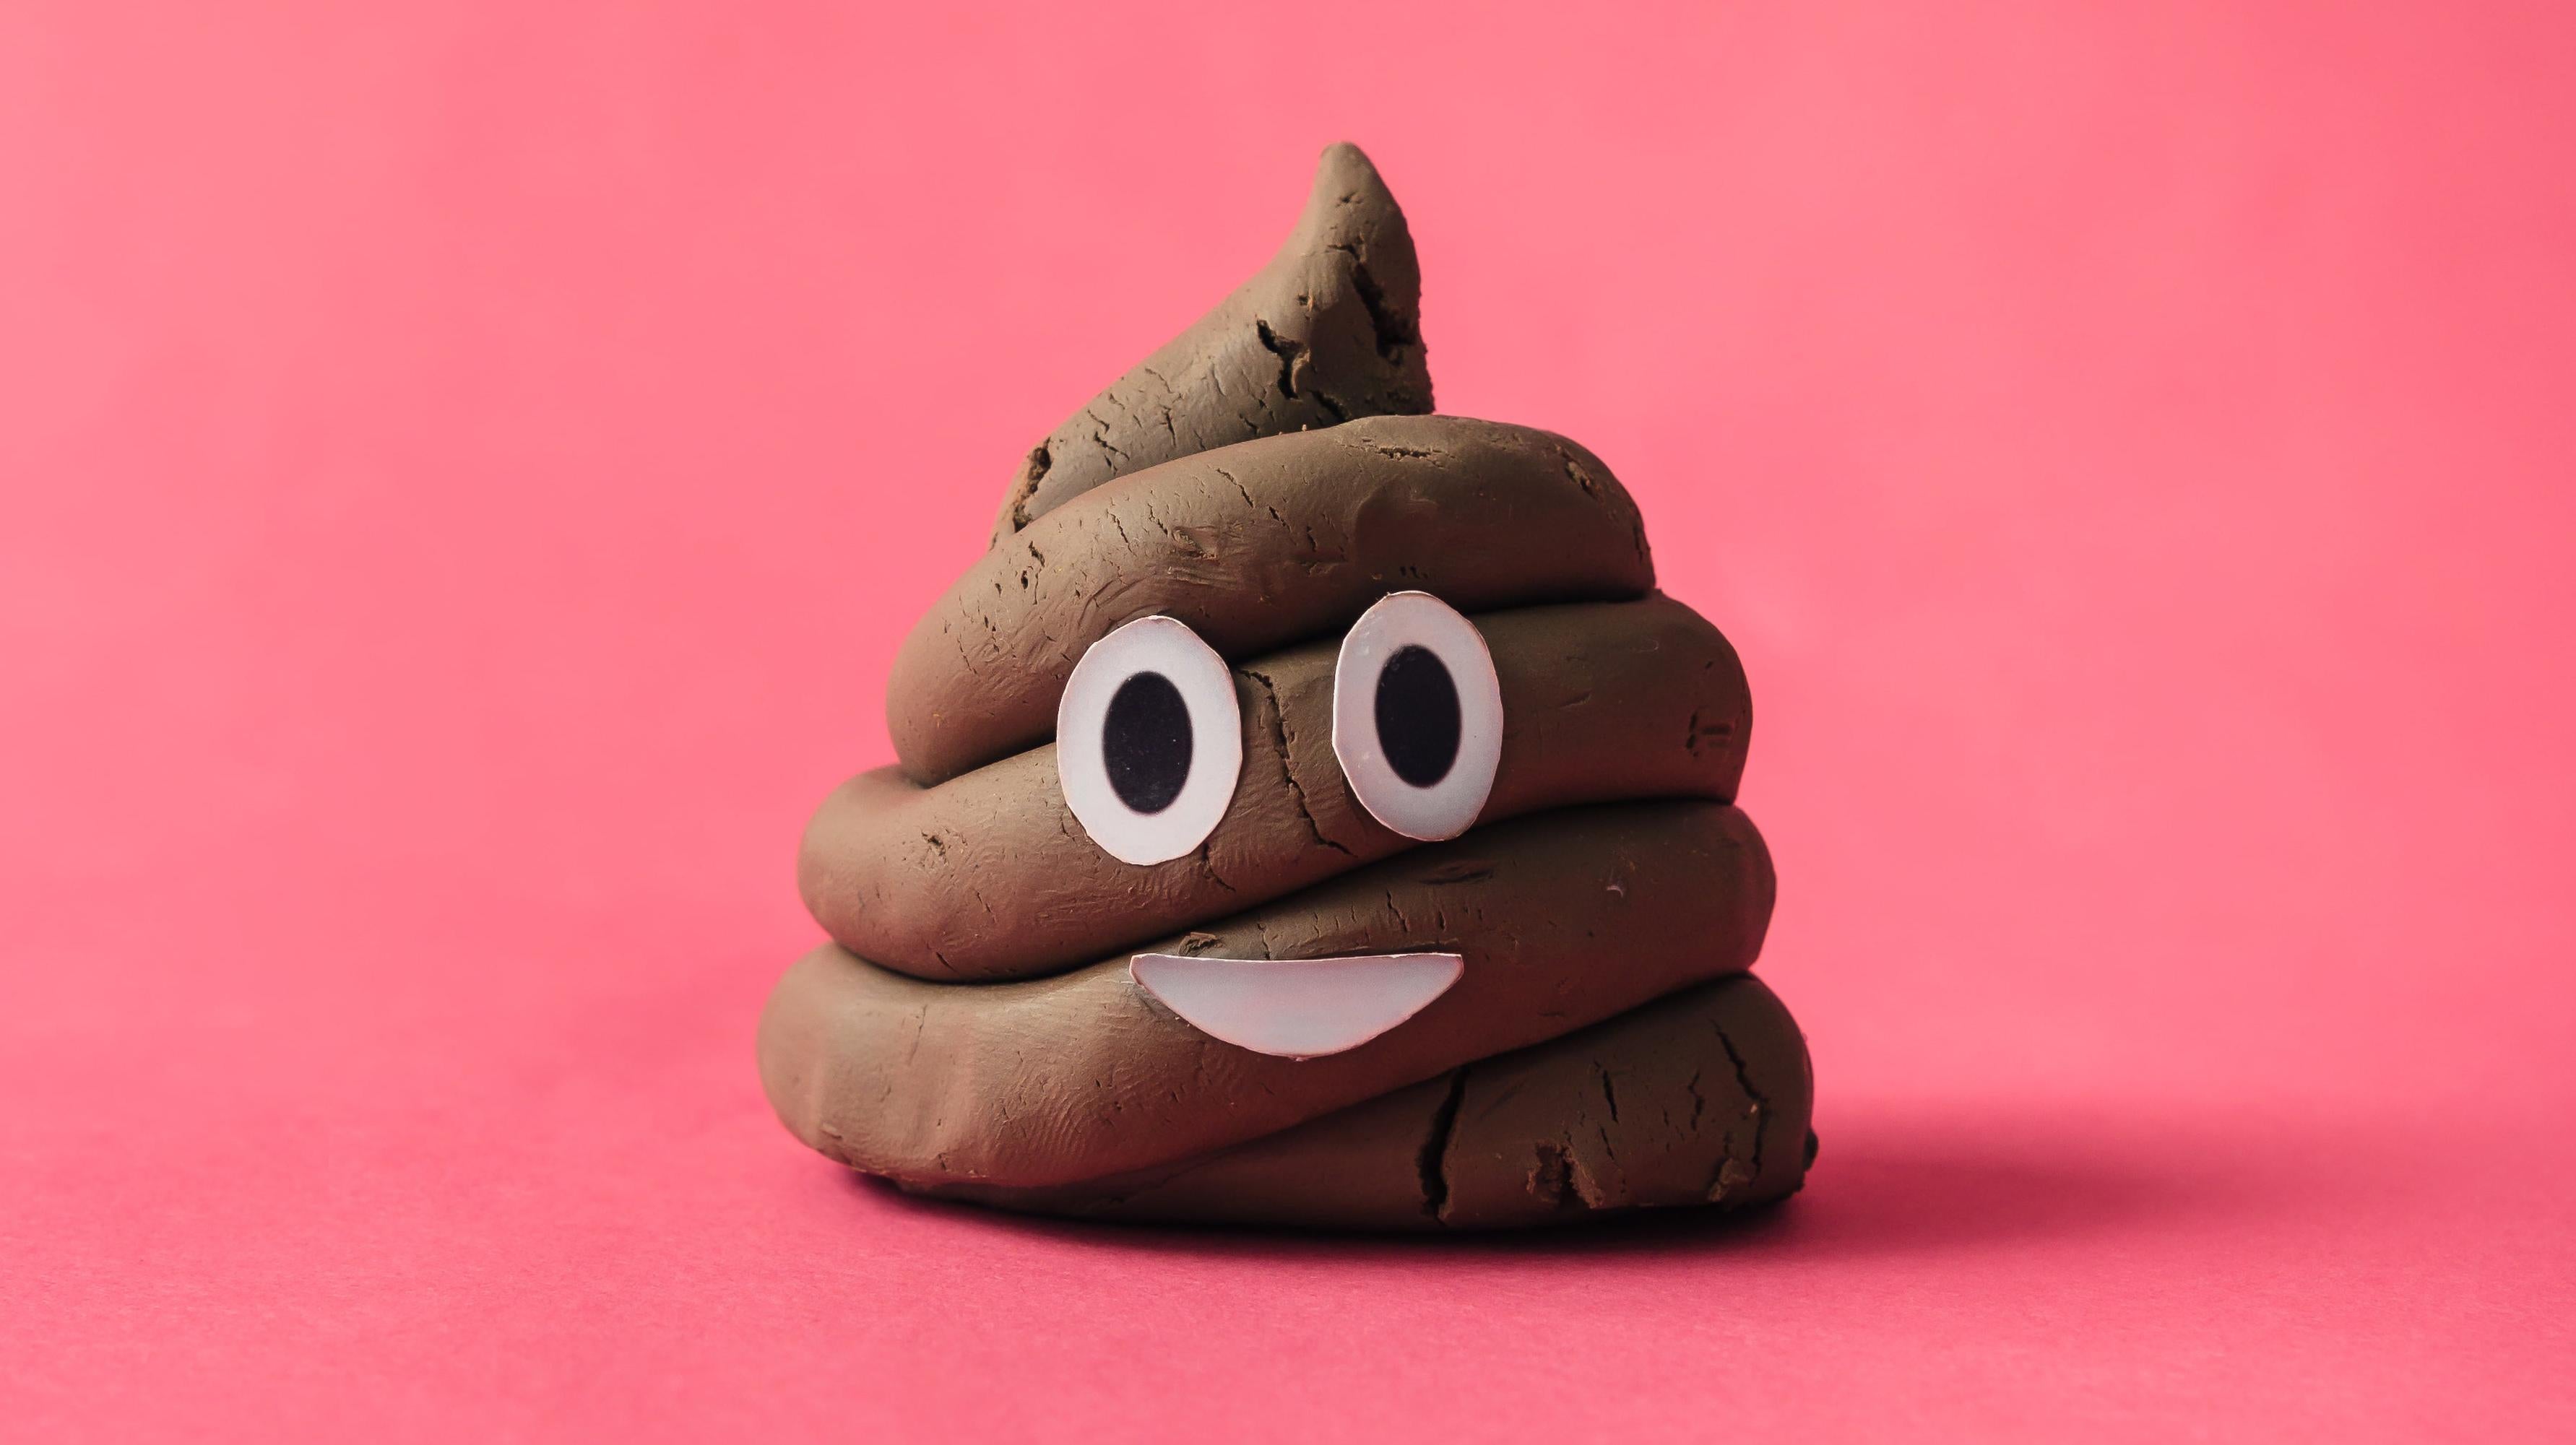 You Can Make Money for Donating Your Poop